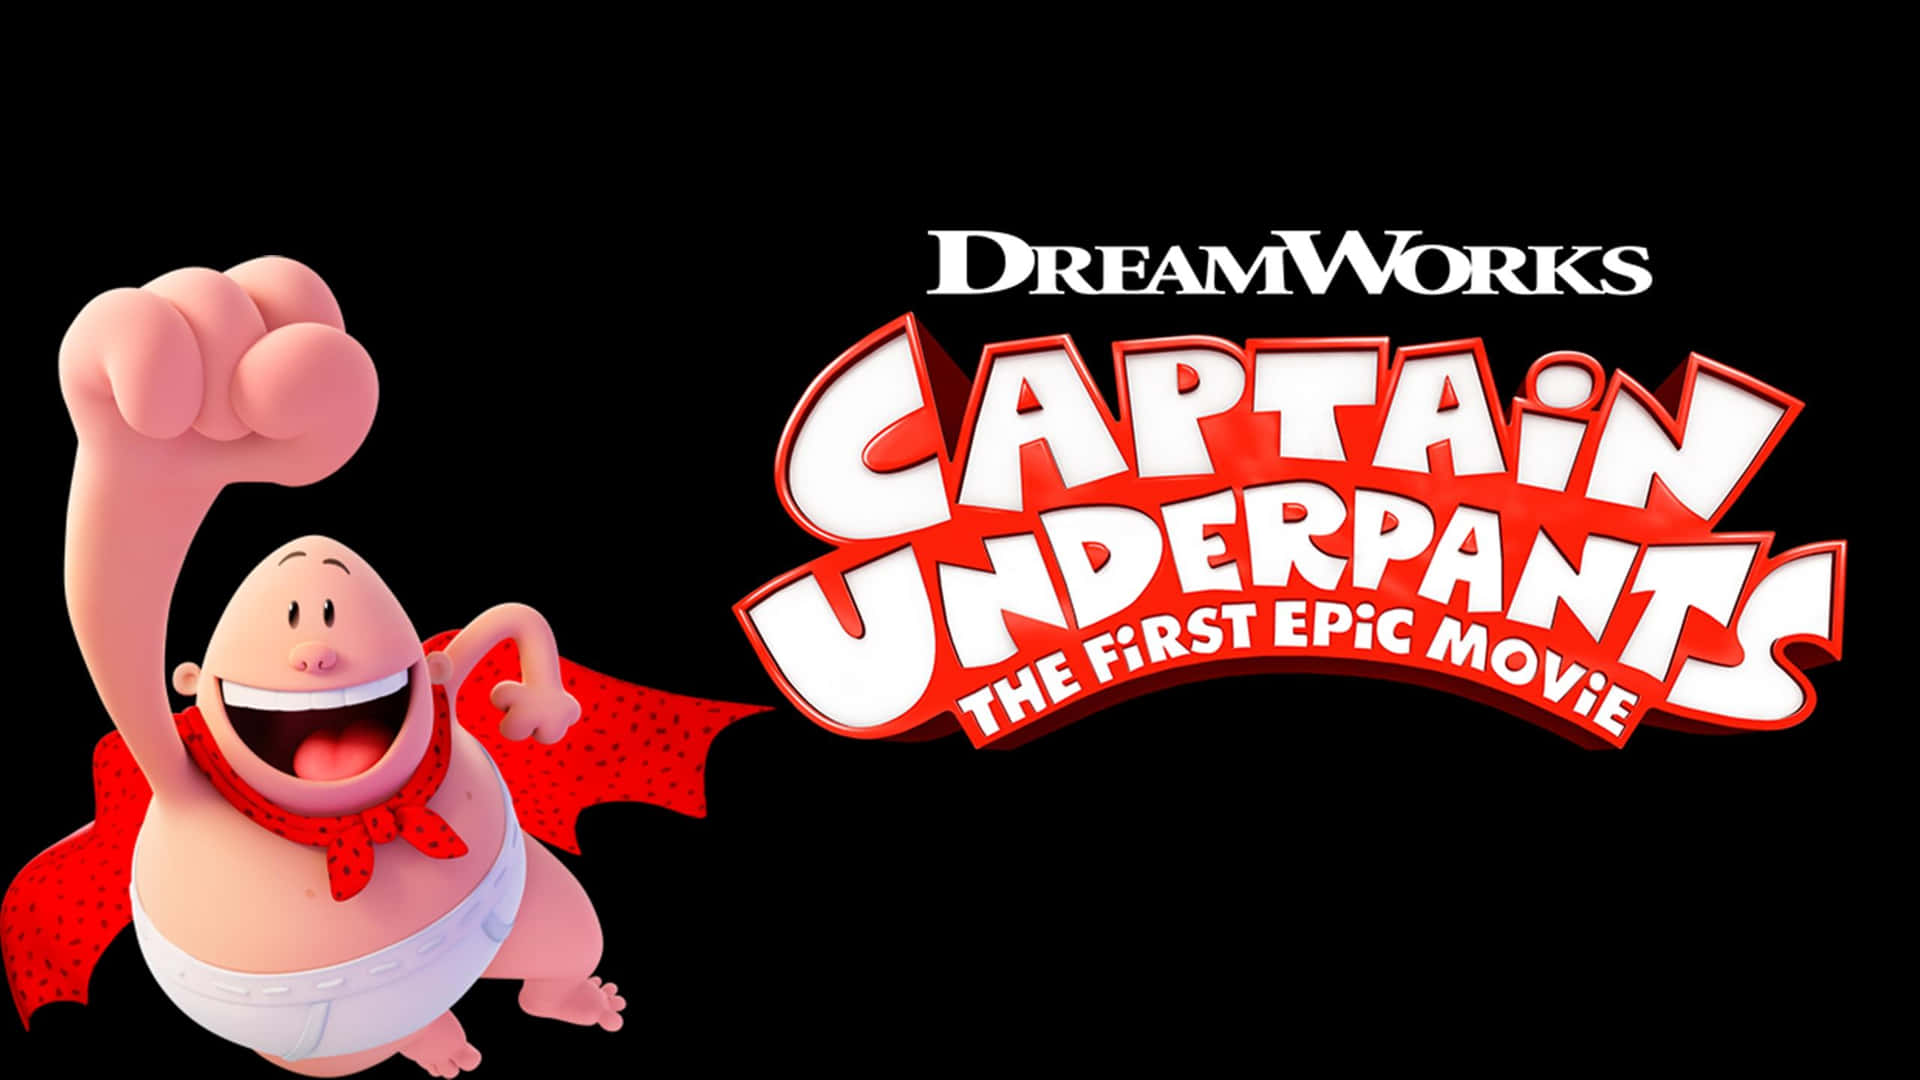 Flying With Title Captain Underpants: The First Epic Movie Wallpaper